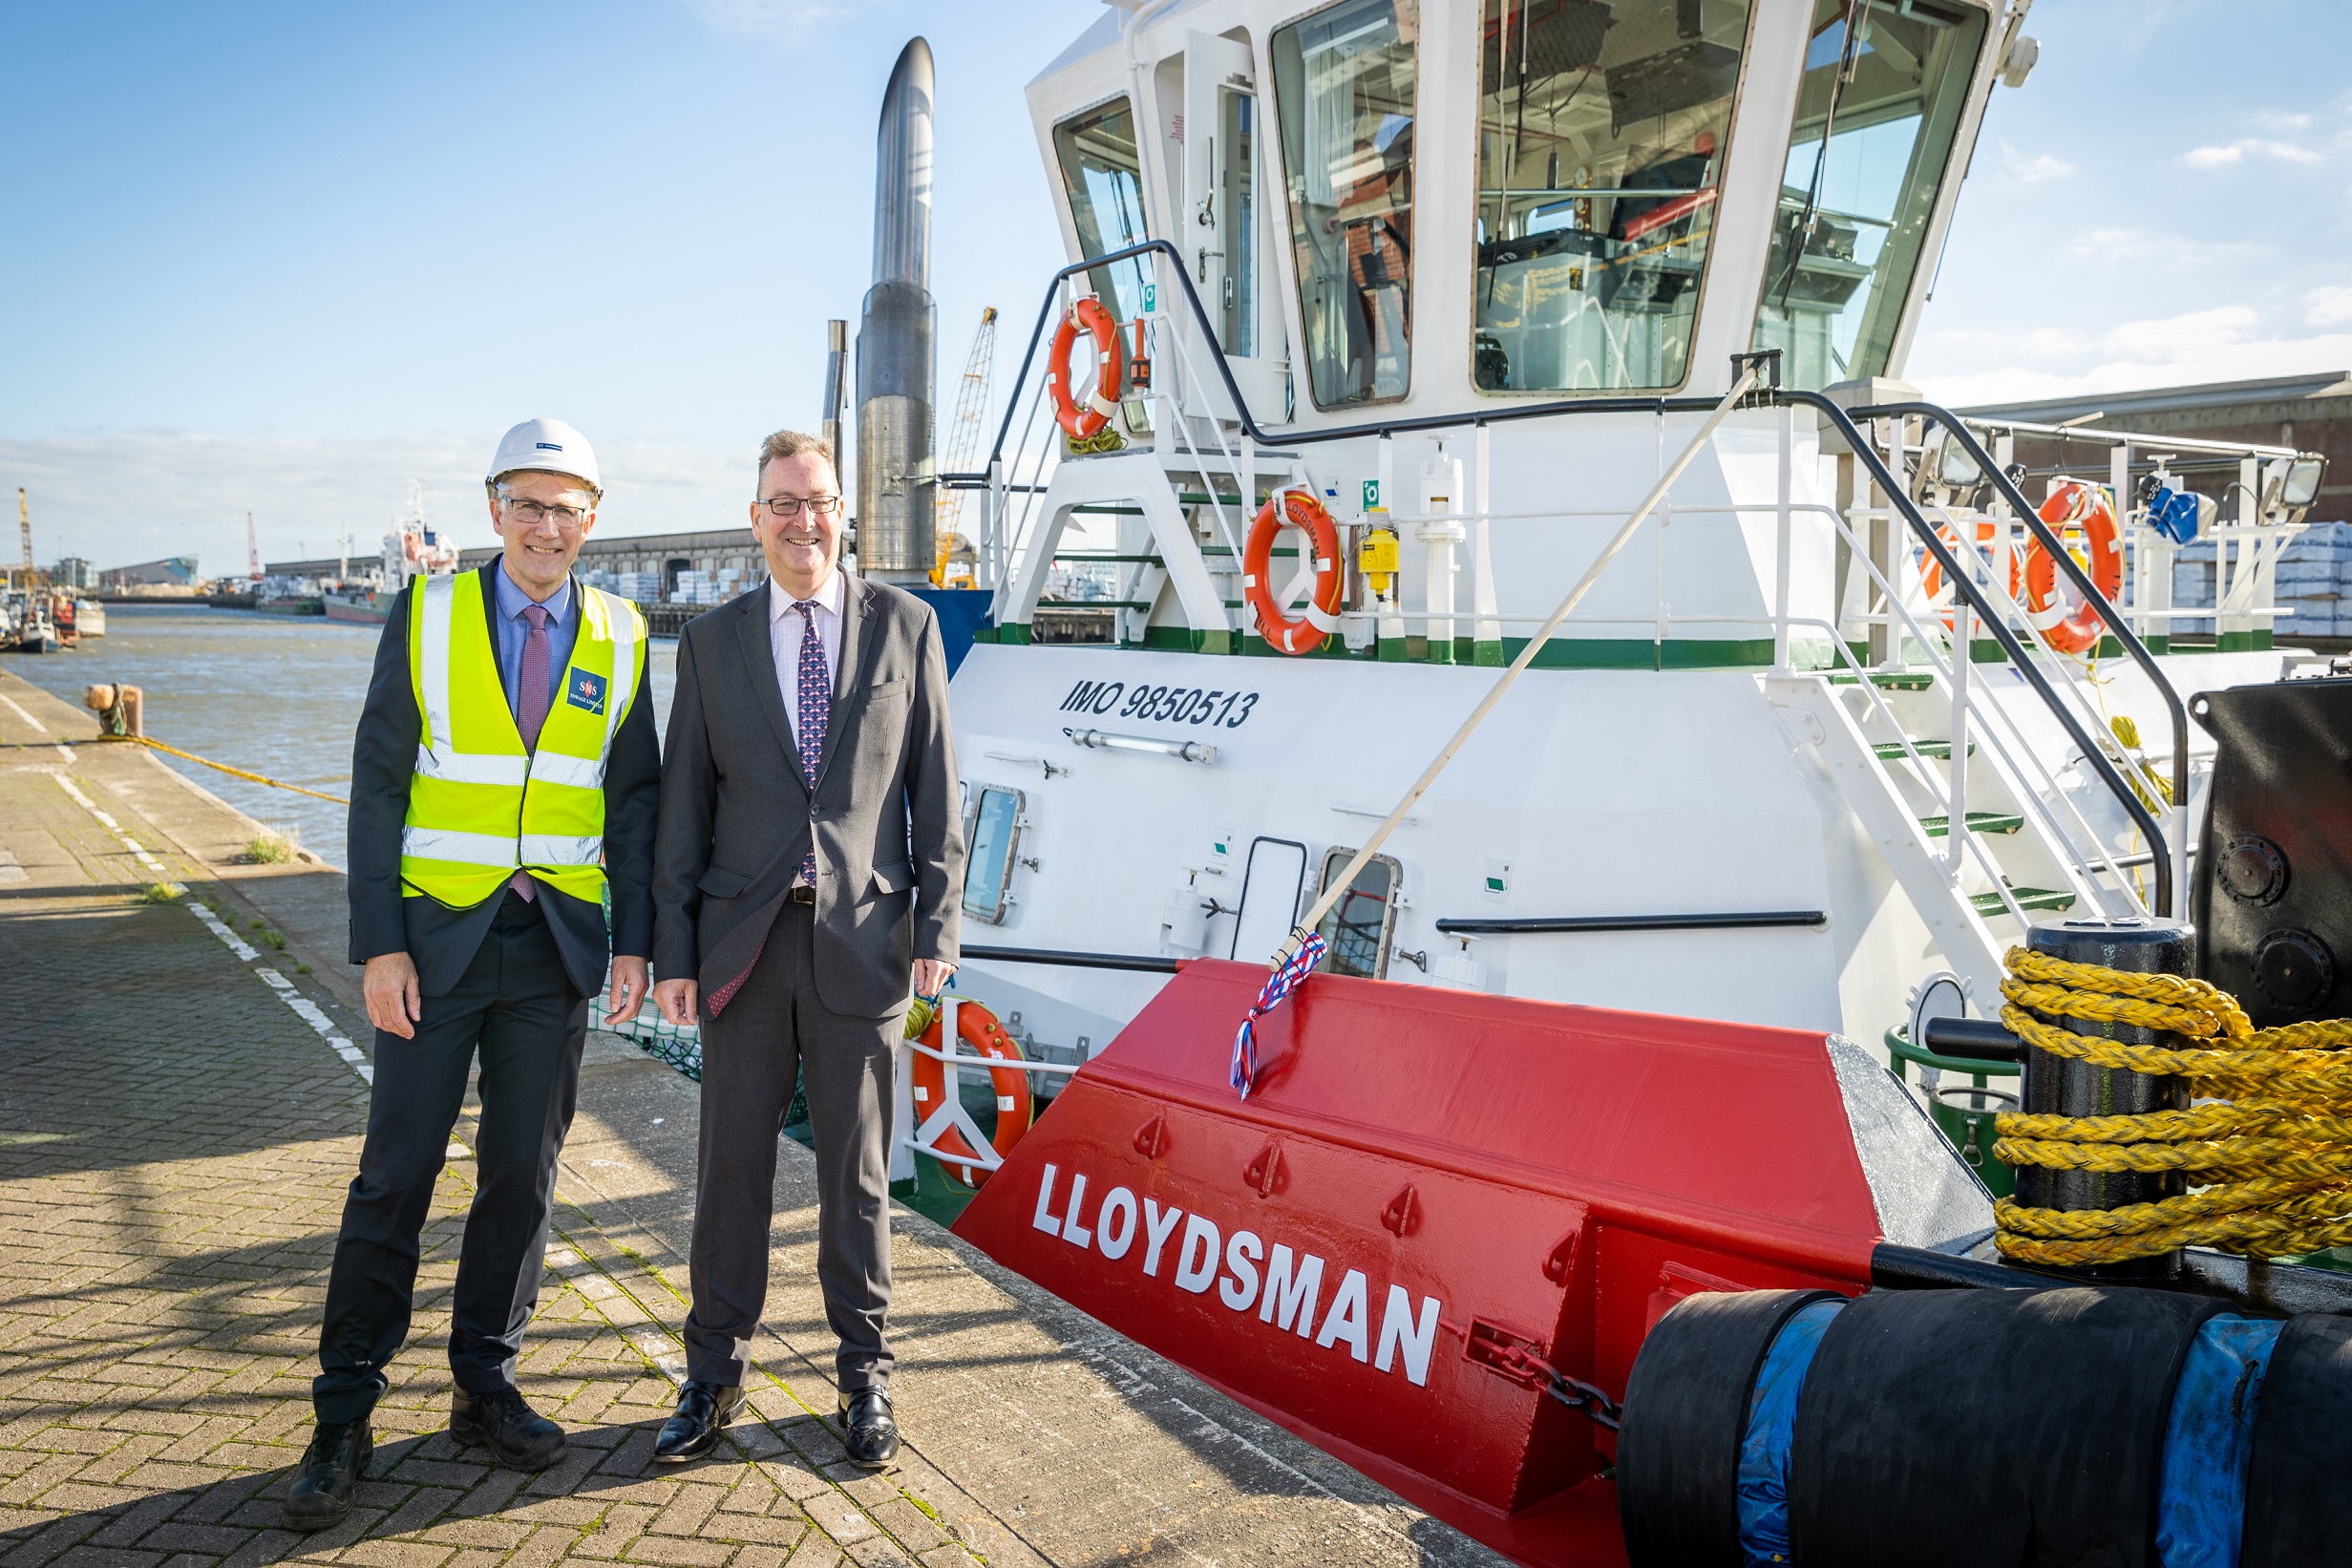 Continued Expansion for SMS Towage with latest Vessel Purchase